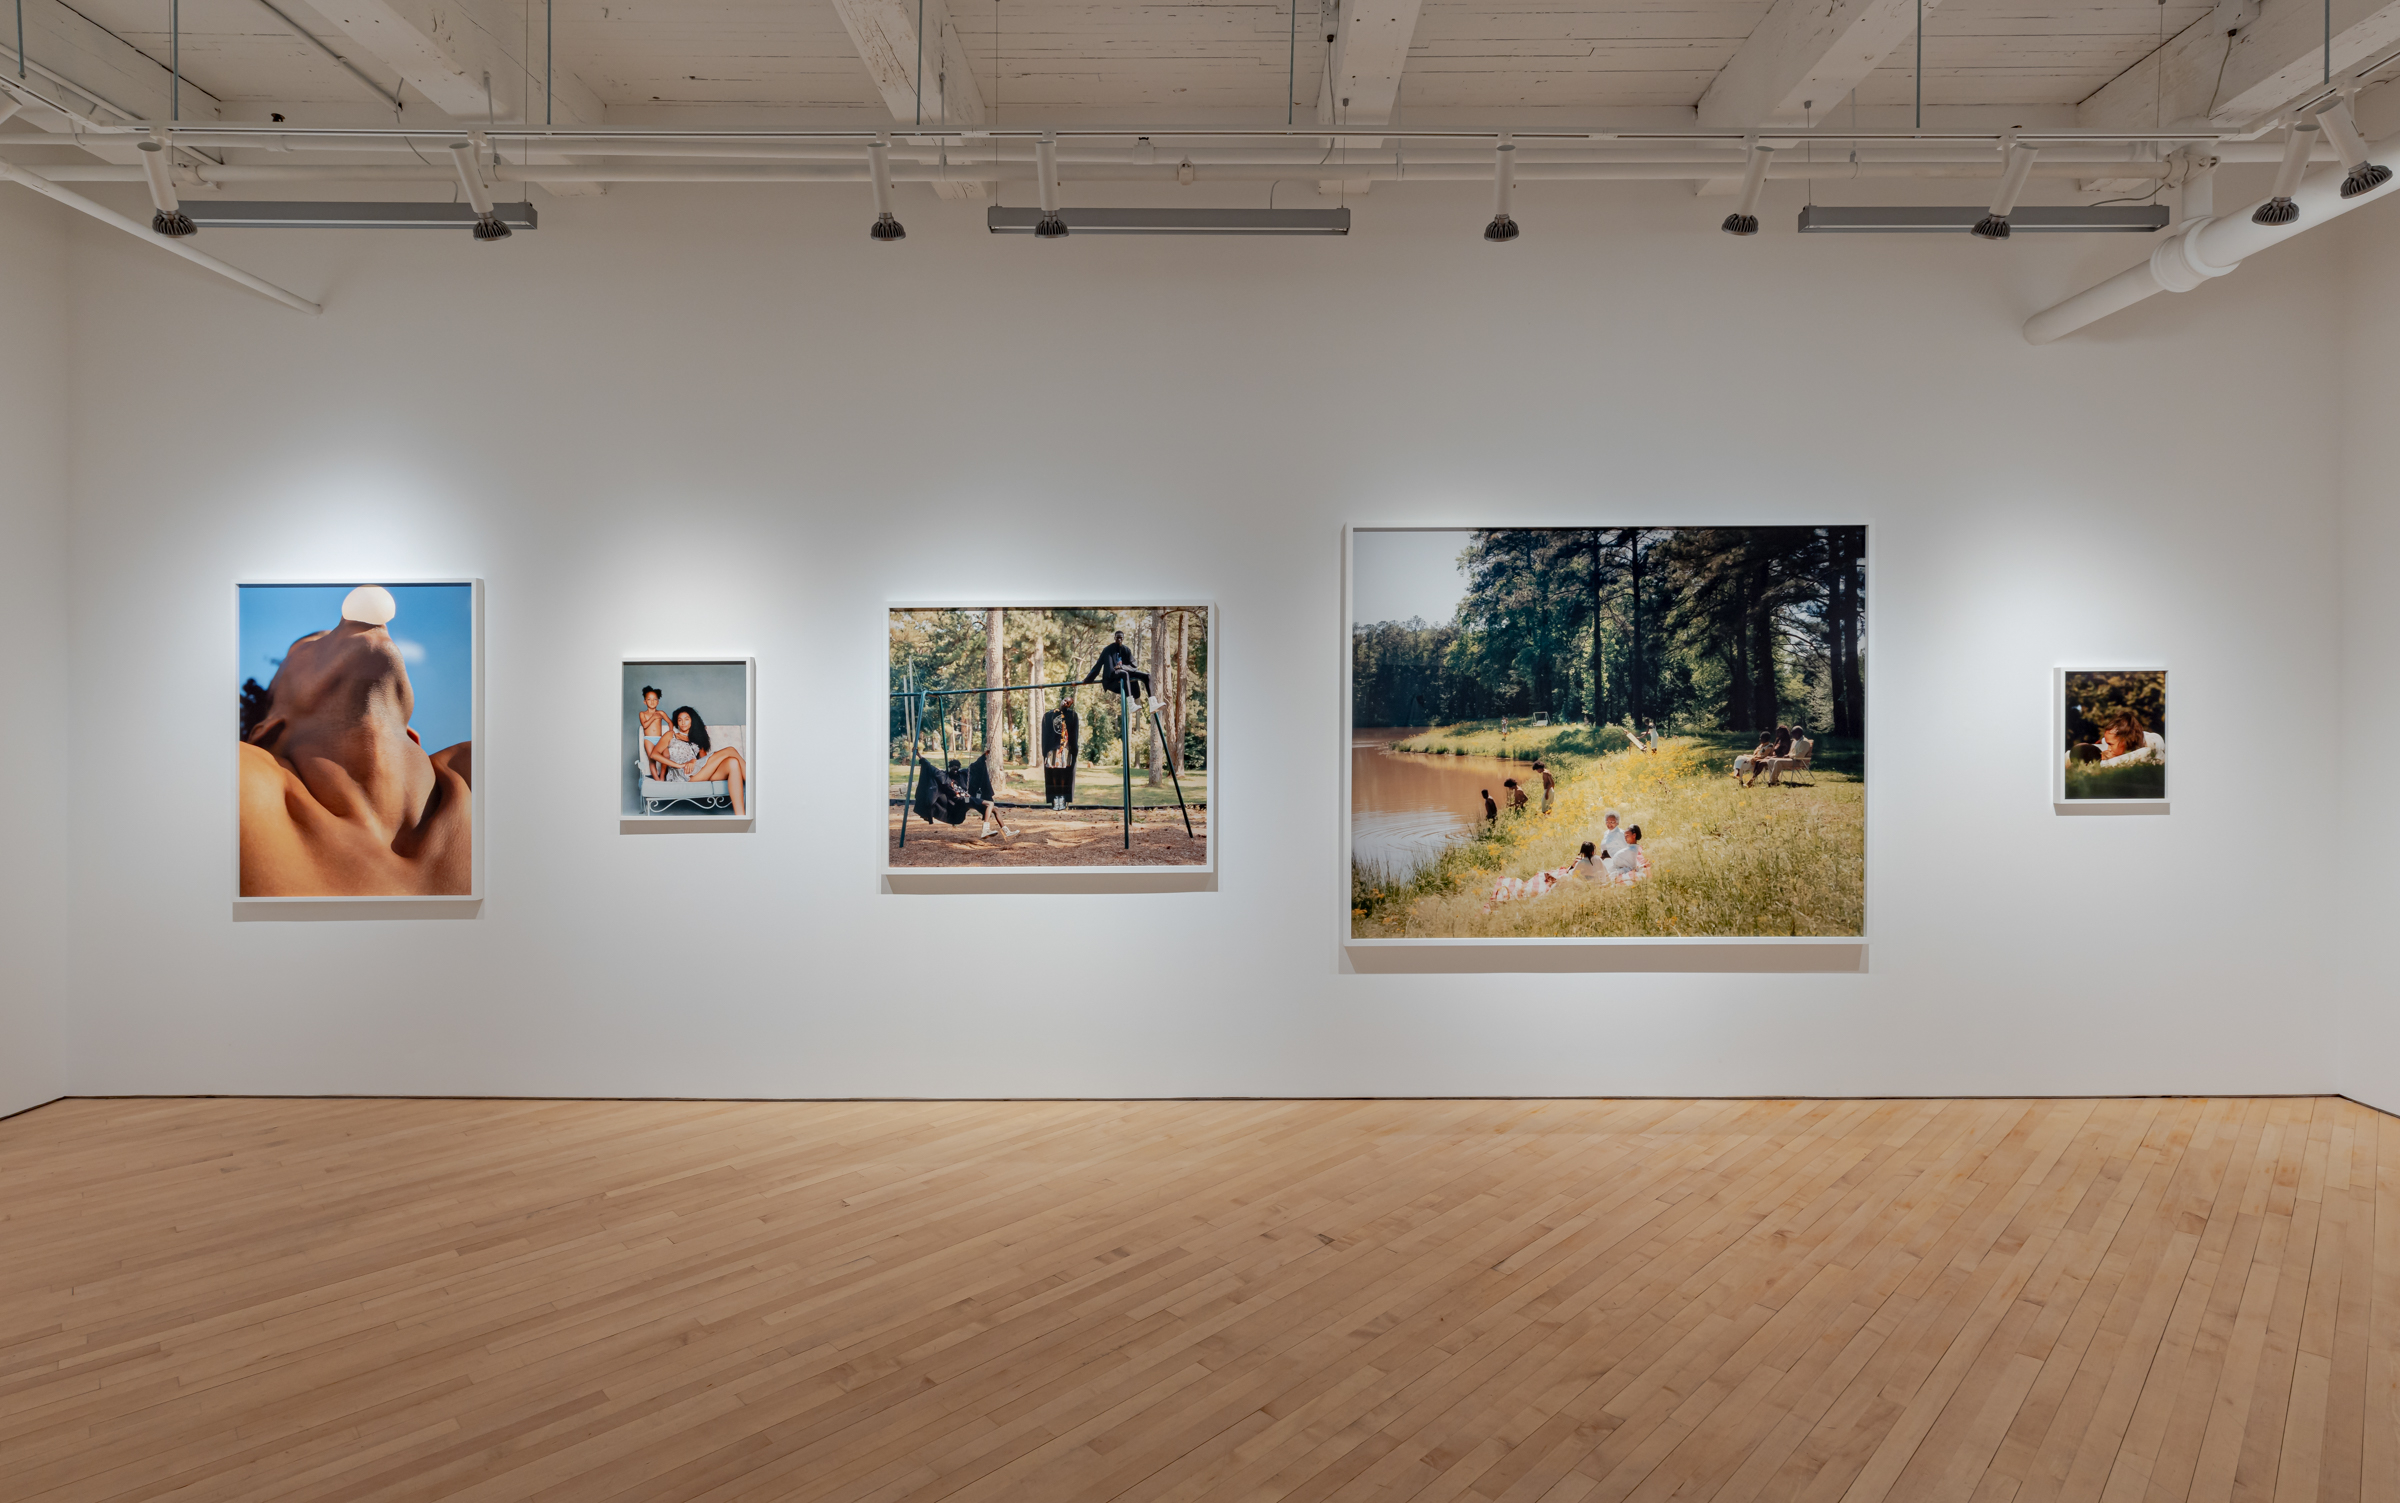     Tyler Mitchell, Cultural Turns, installation view at CONTACT Gallery, Toronto, 2022. © Tyler Mitchell. Courtesy of the artist, Jack Shainman Gallery, New York, and CONTACT. Photo: Toni Hafkenscheid

